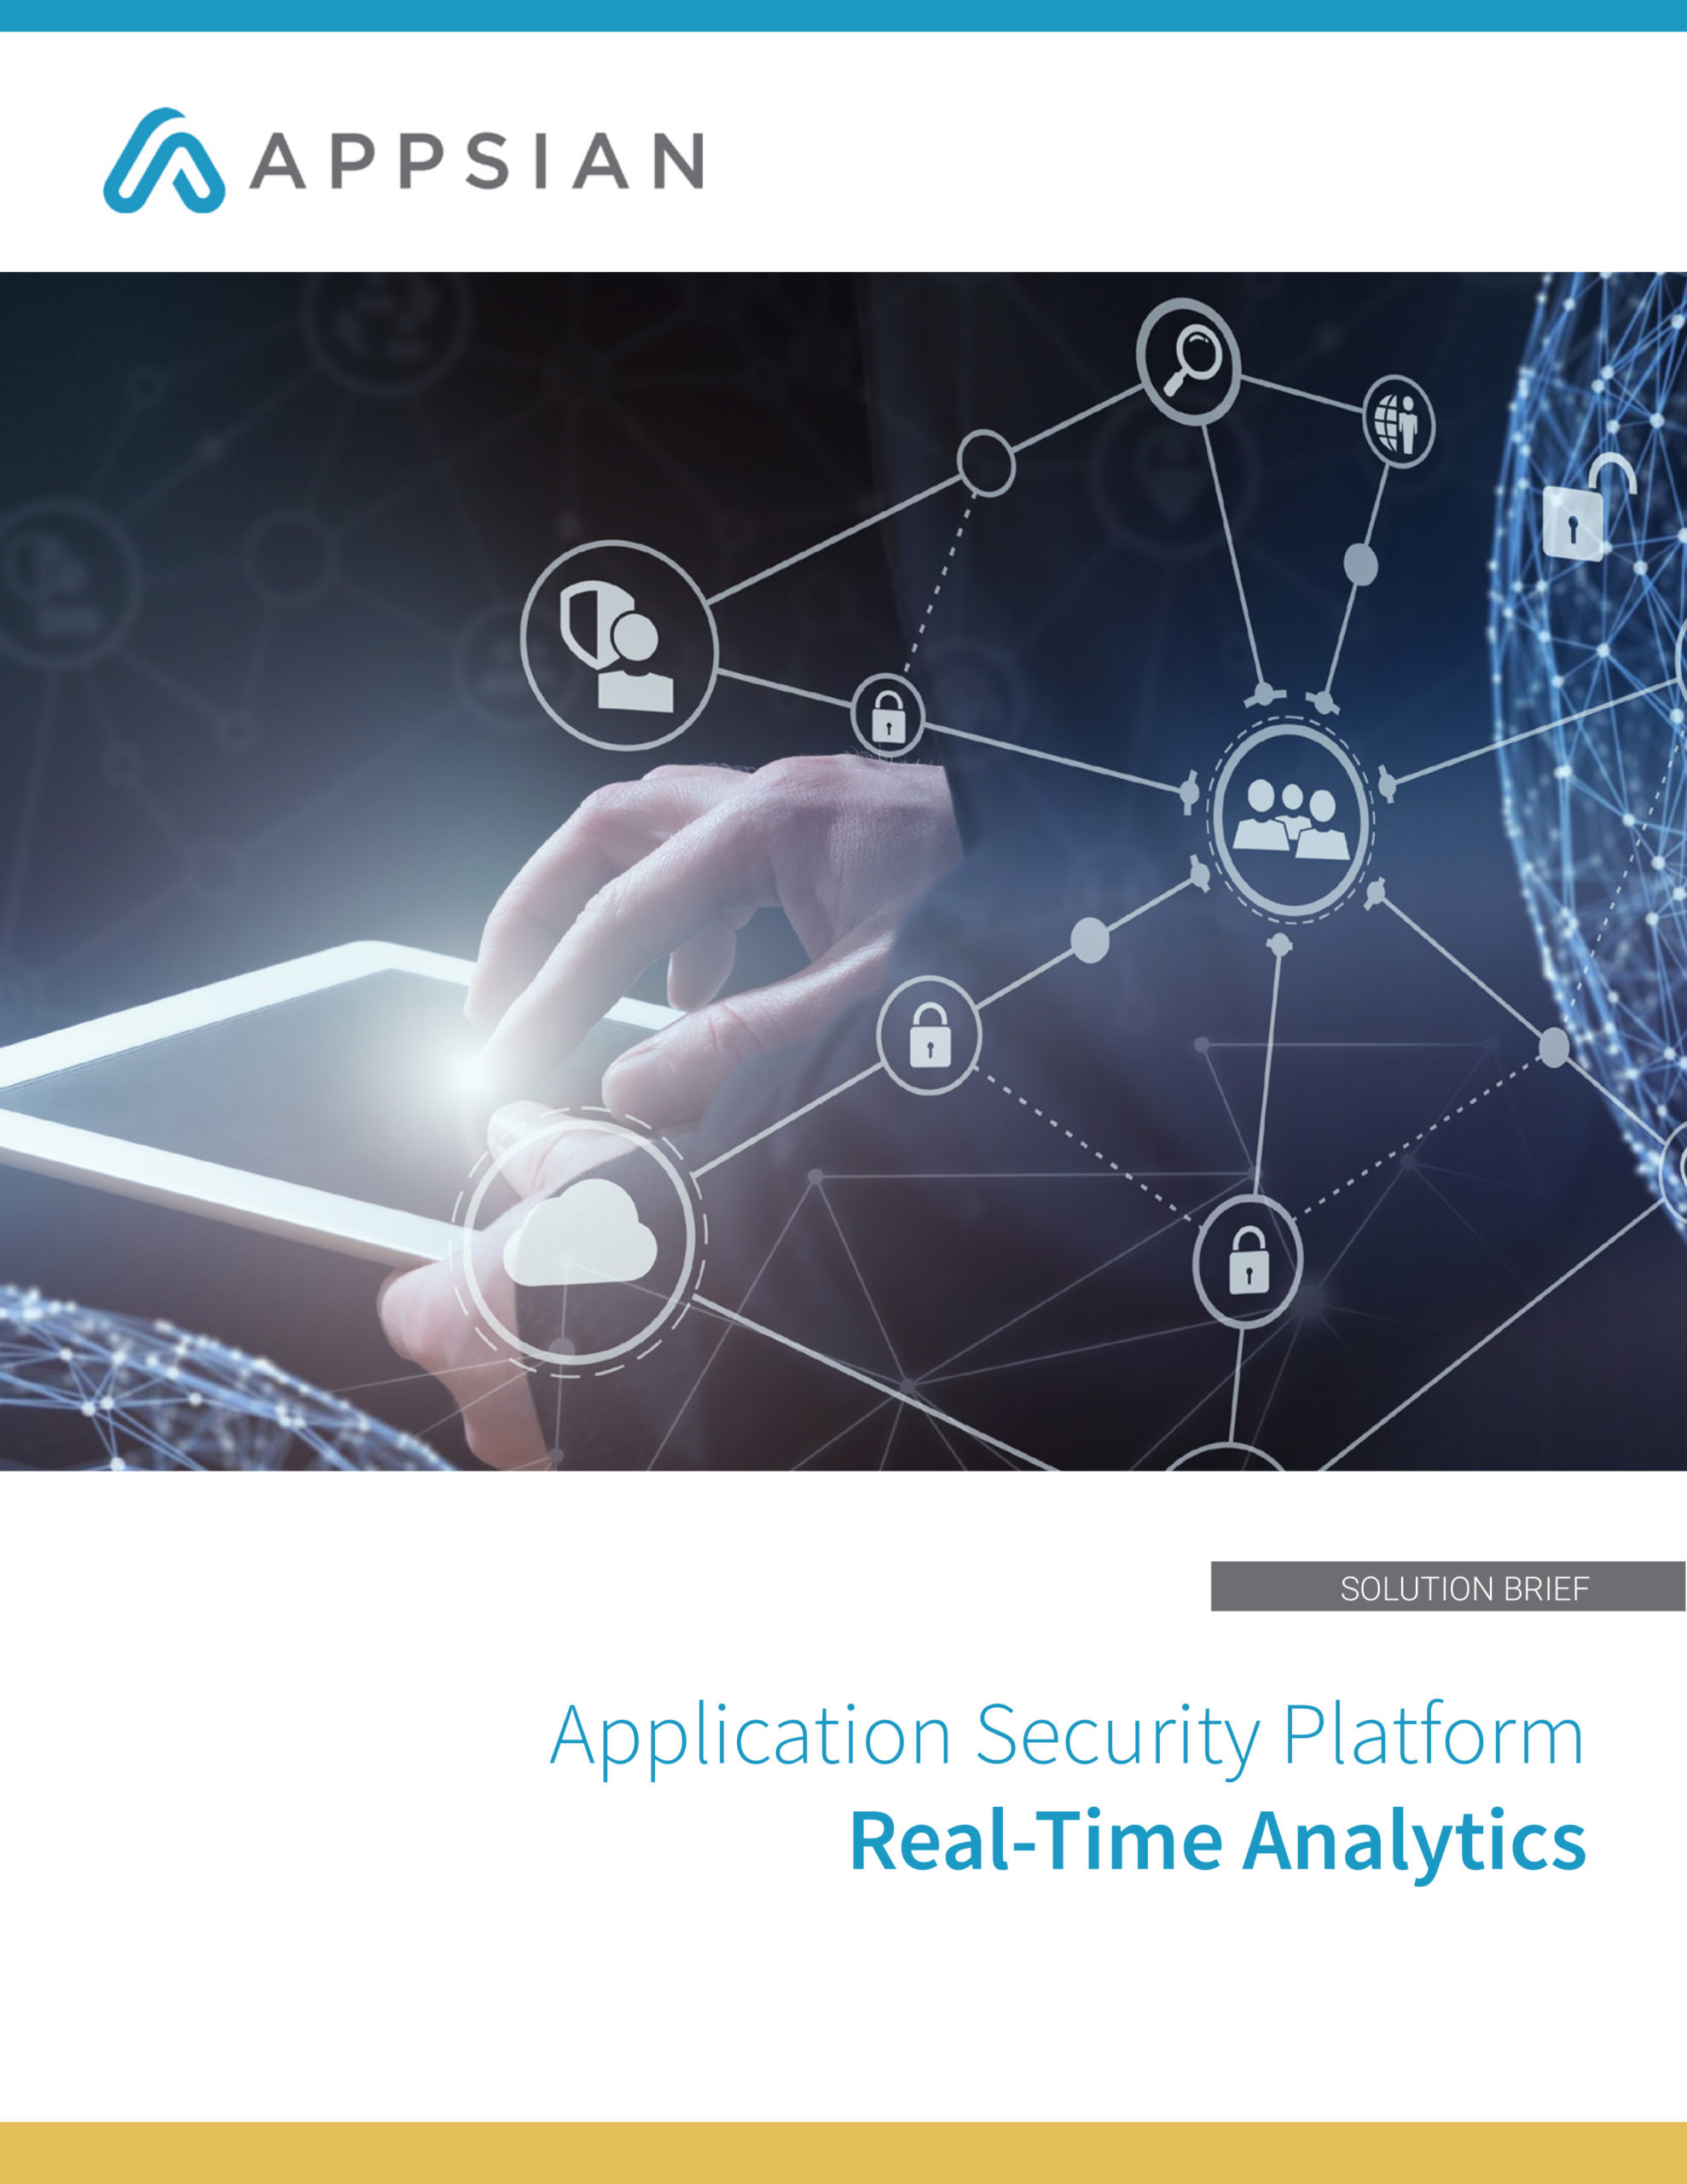 Real-Time User Access Analytics for PeopleSoft